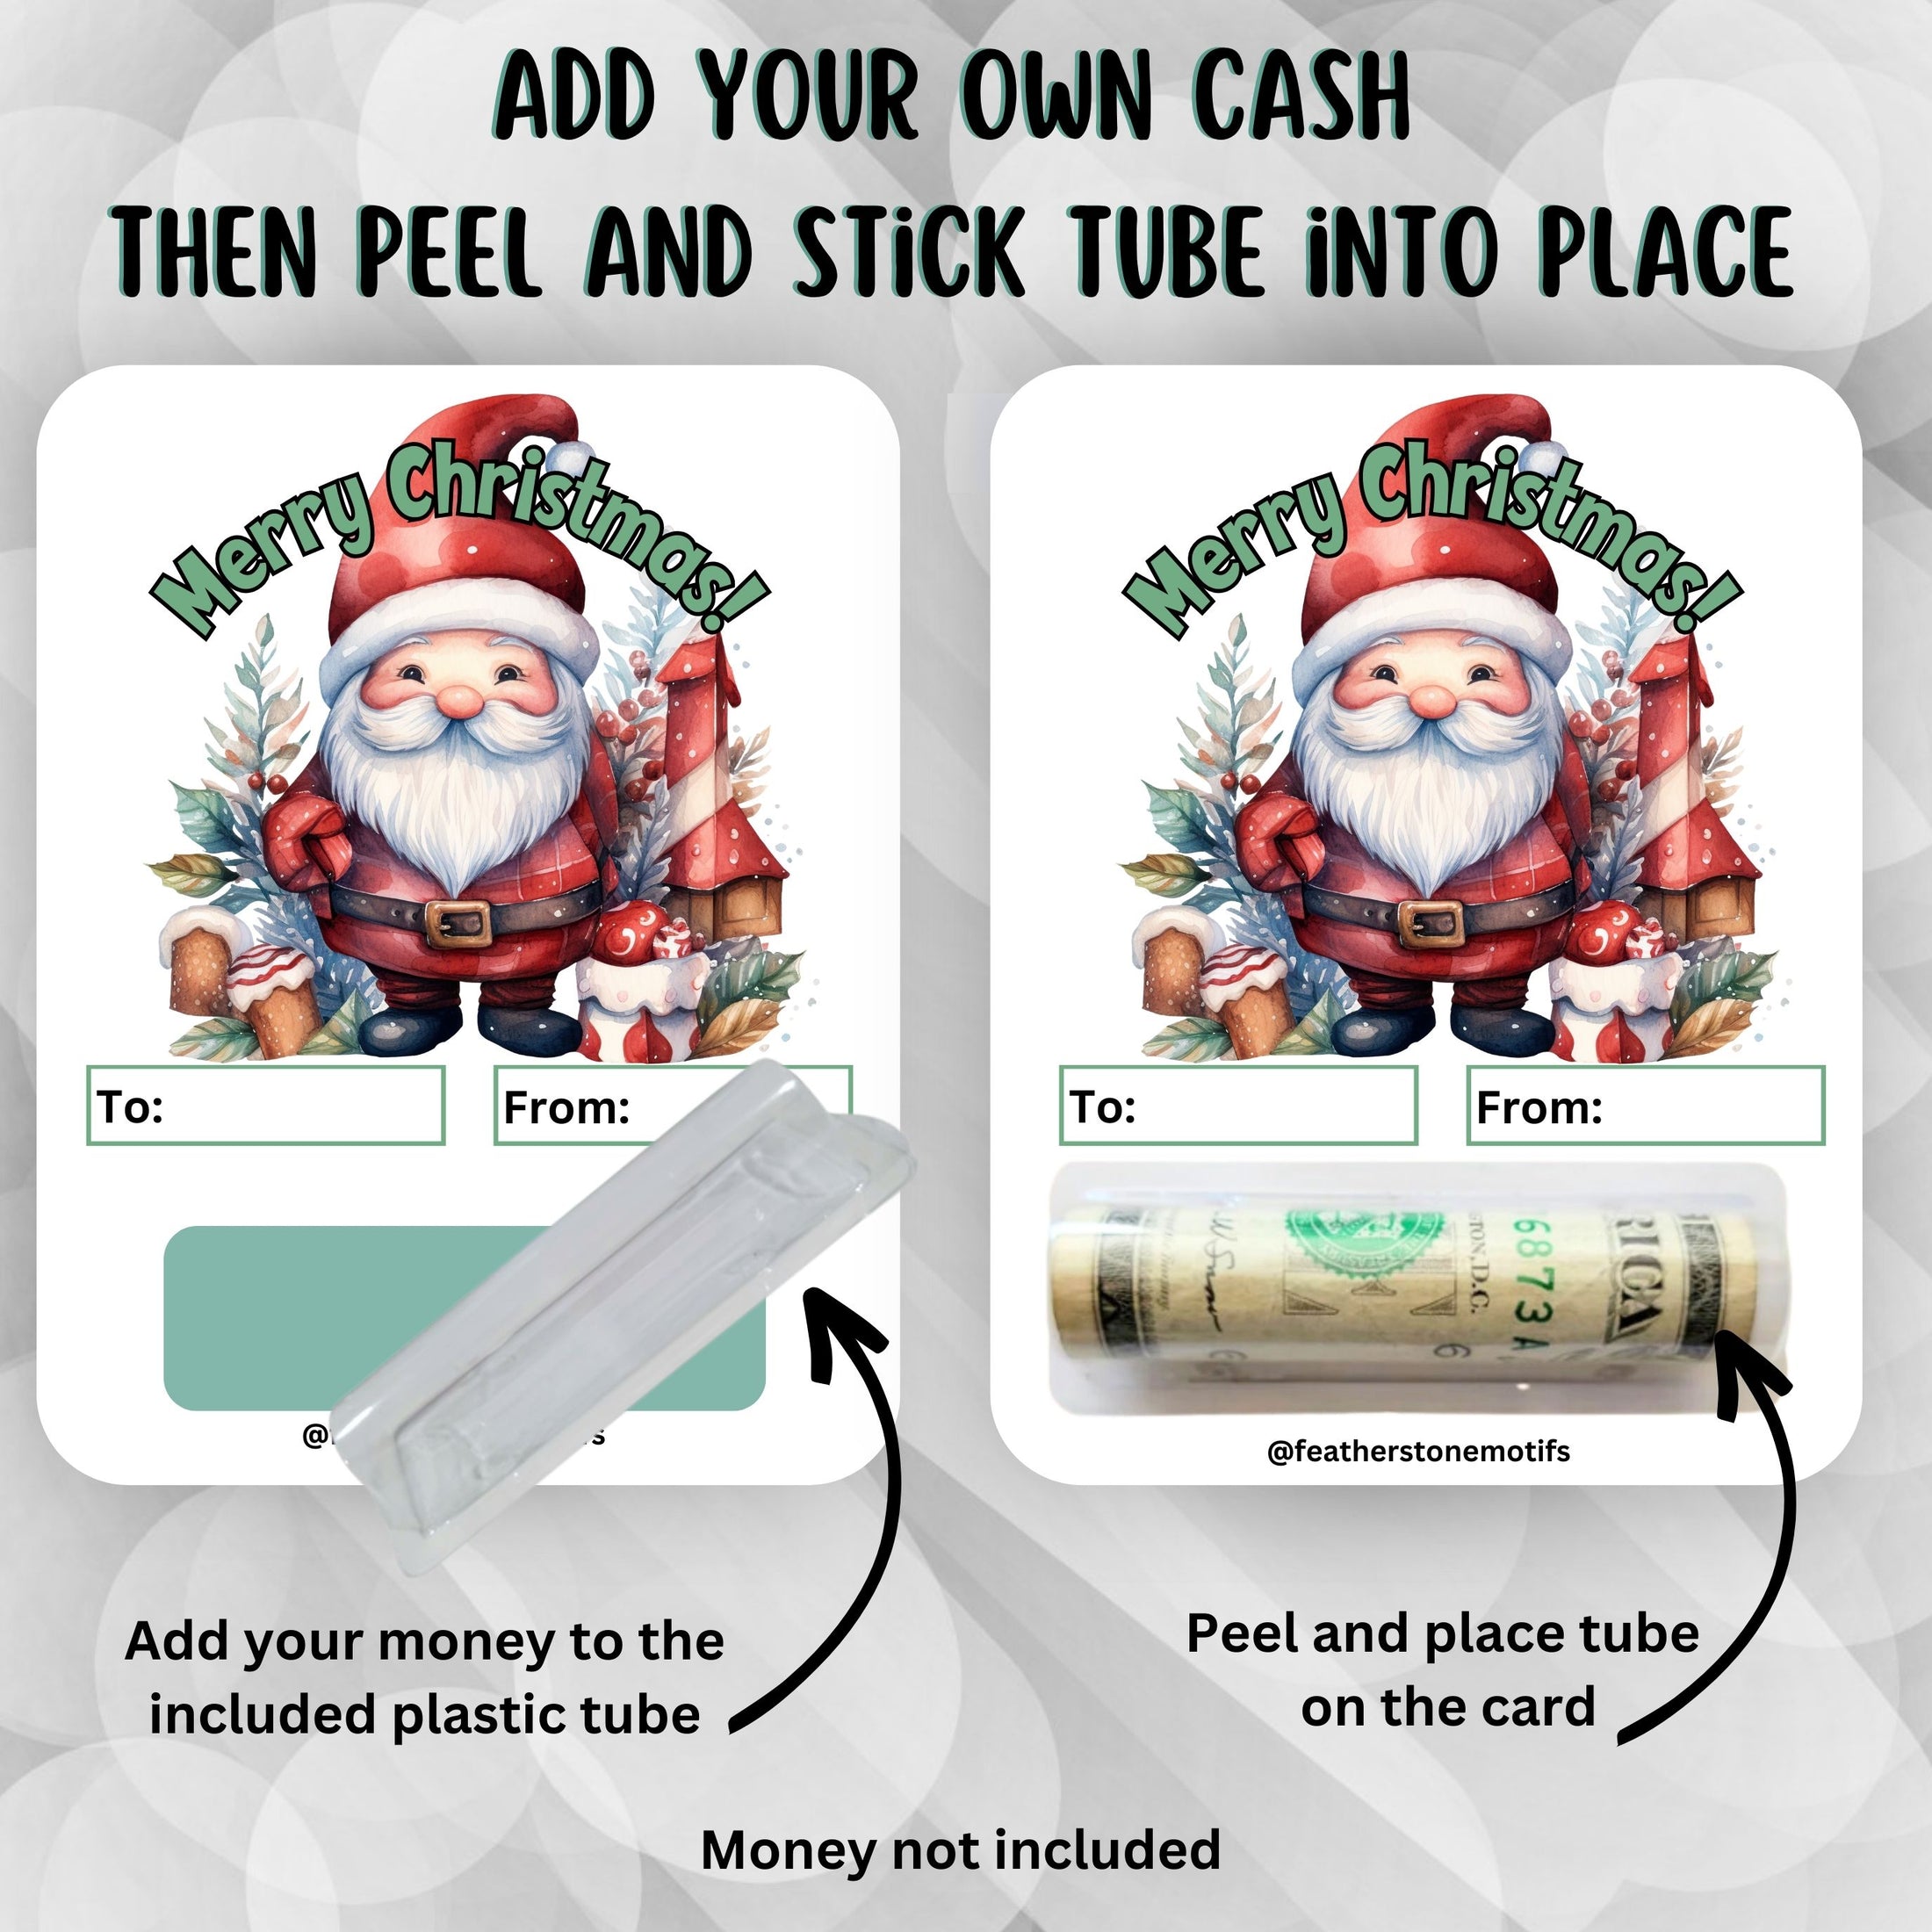 This image shows how to apply the money tube to the Santa Christmas money card.